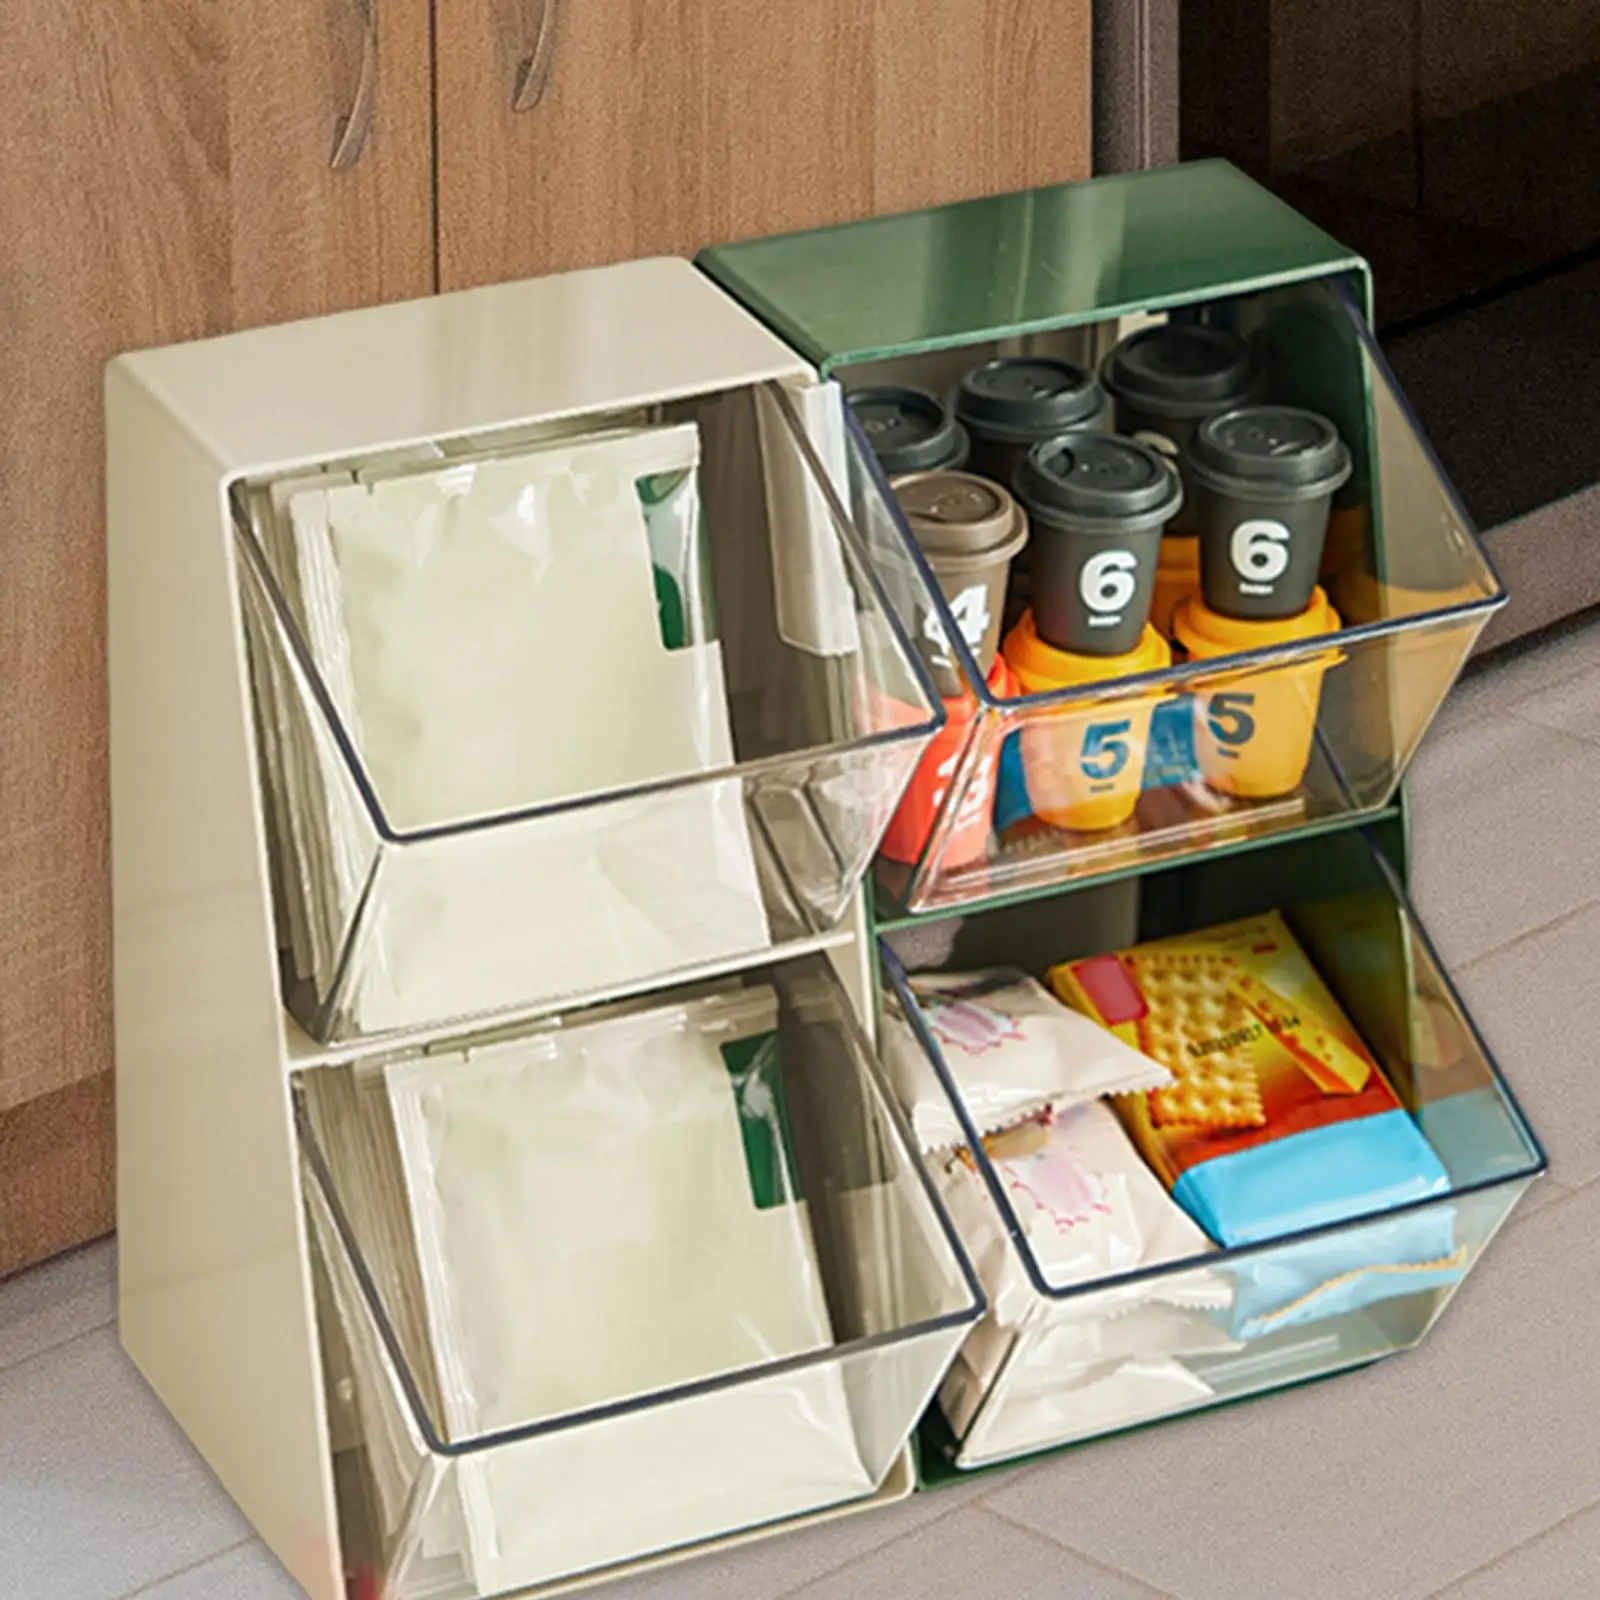 Clear Tea Box Storage Divided Container Portable Tea Holder Rack Large Capacity for Condiments Coffee Creamers Closets Bathroom